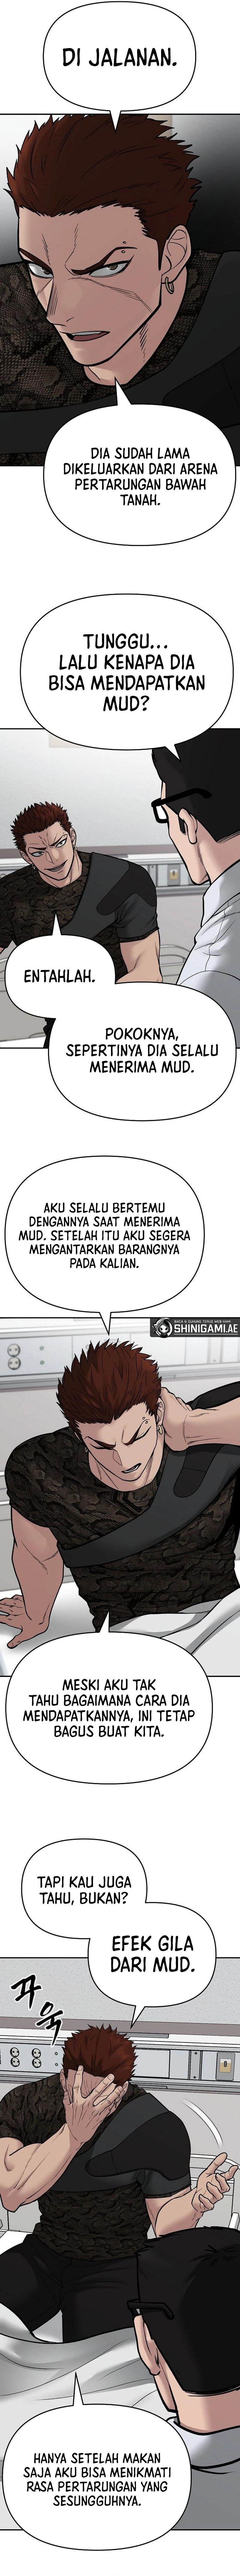 the-bully-in-charge Chapter 74